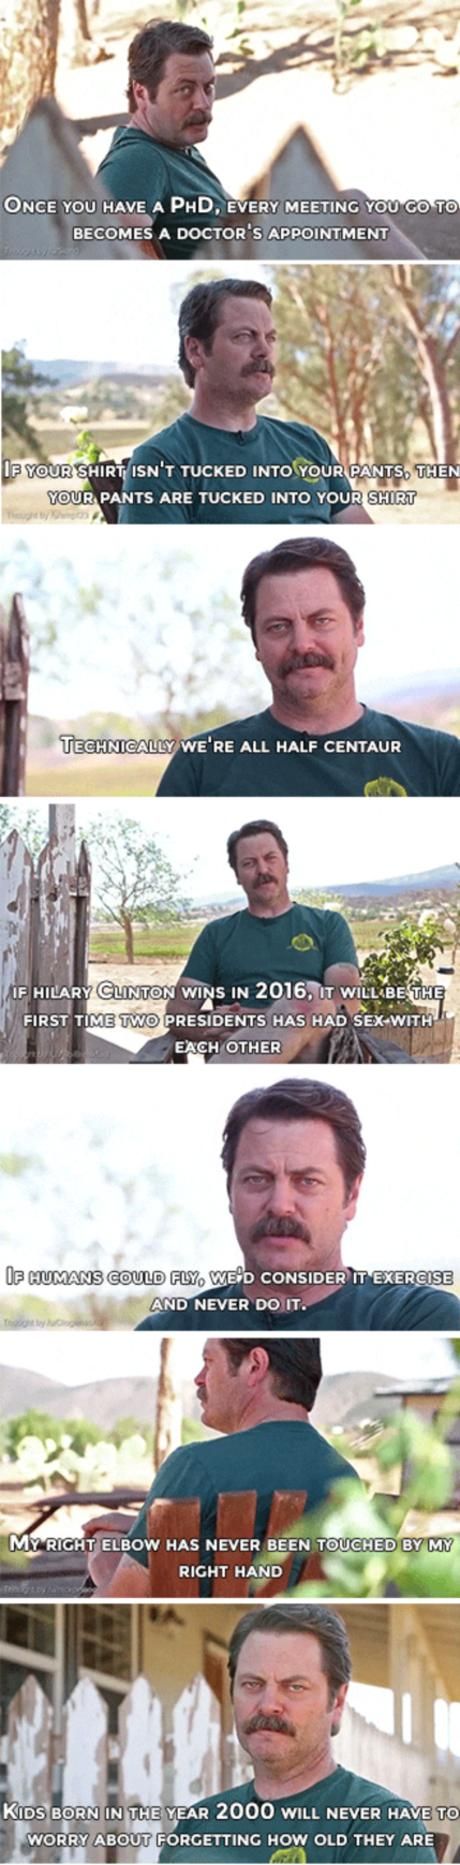 Nick Offerman dropping think bombs